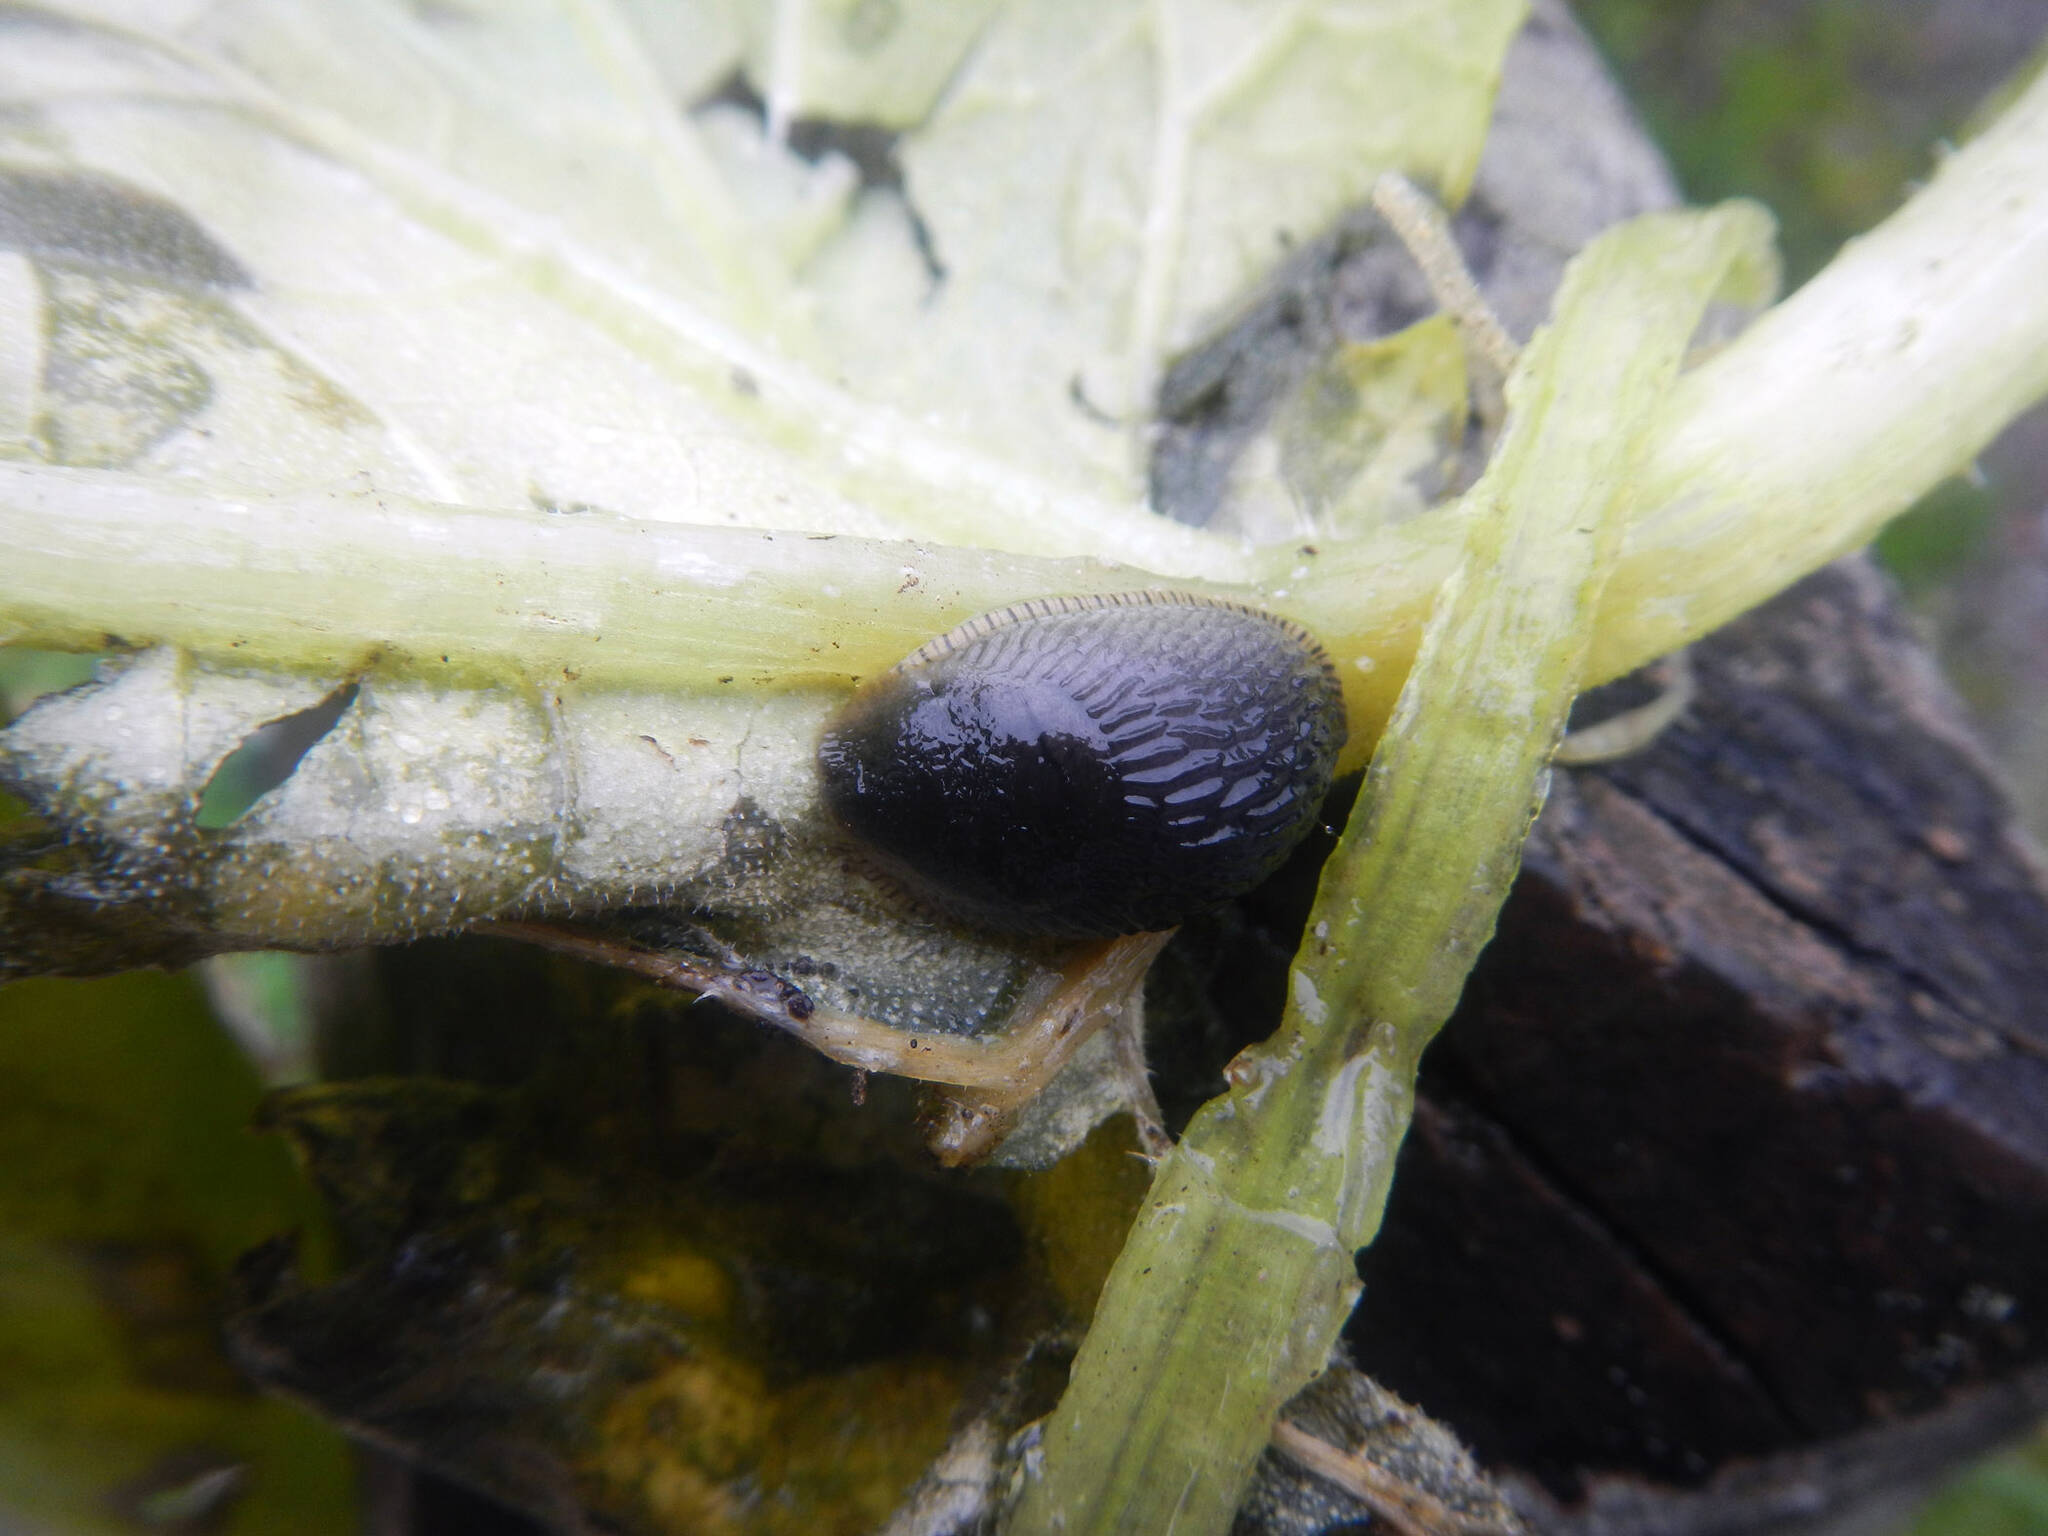 A young black slug begins its life cycle in Tenakee Springs in September of 2022. (Photo by Dimitra Lavrakas)